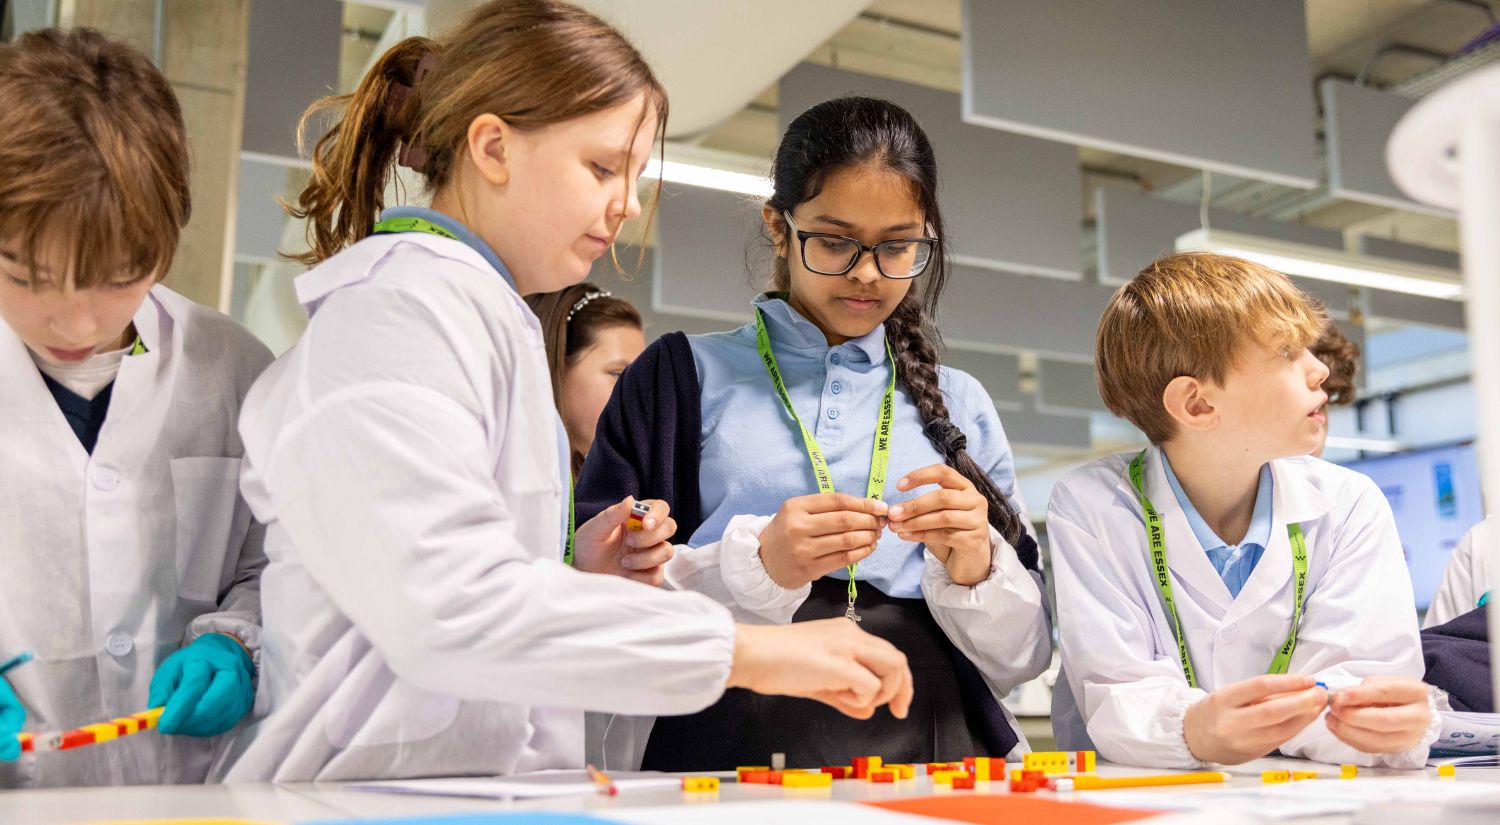 Using Lego to understand and explore DNA sequencing